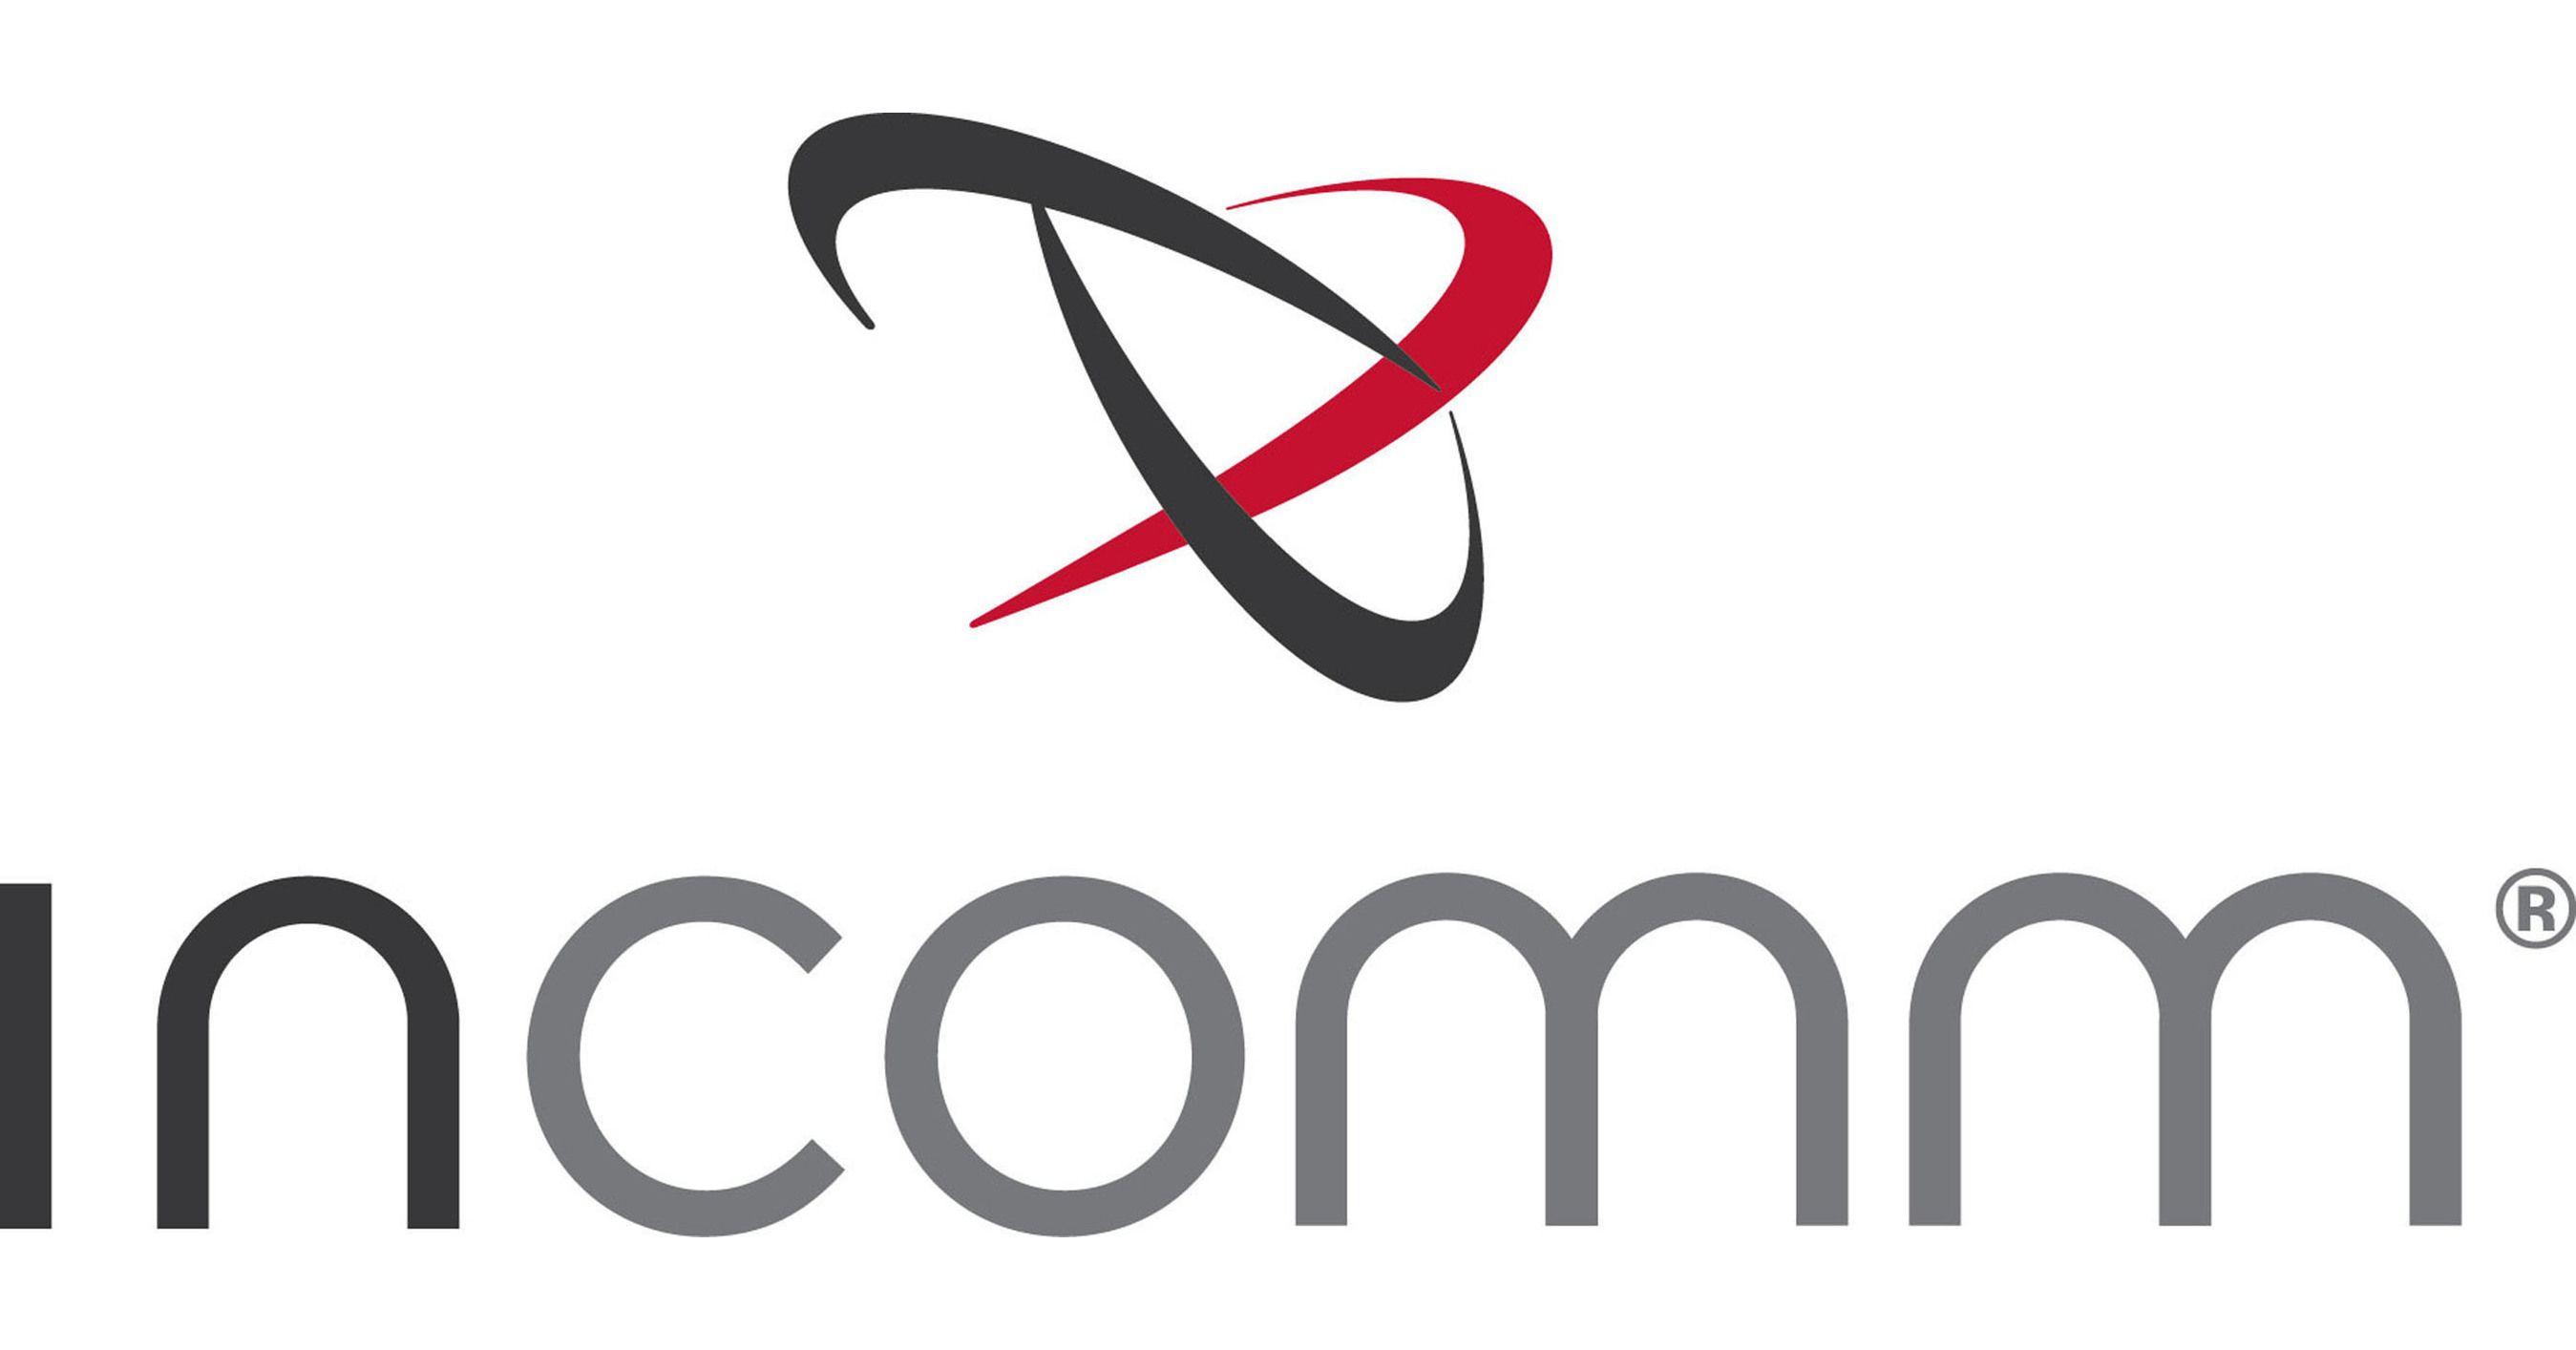 Inncomm Logo - InComm Expands Its Barcode Payment Solutions with New Partnership